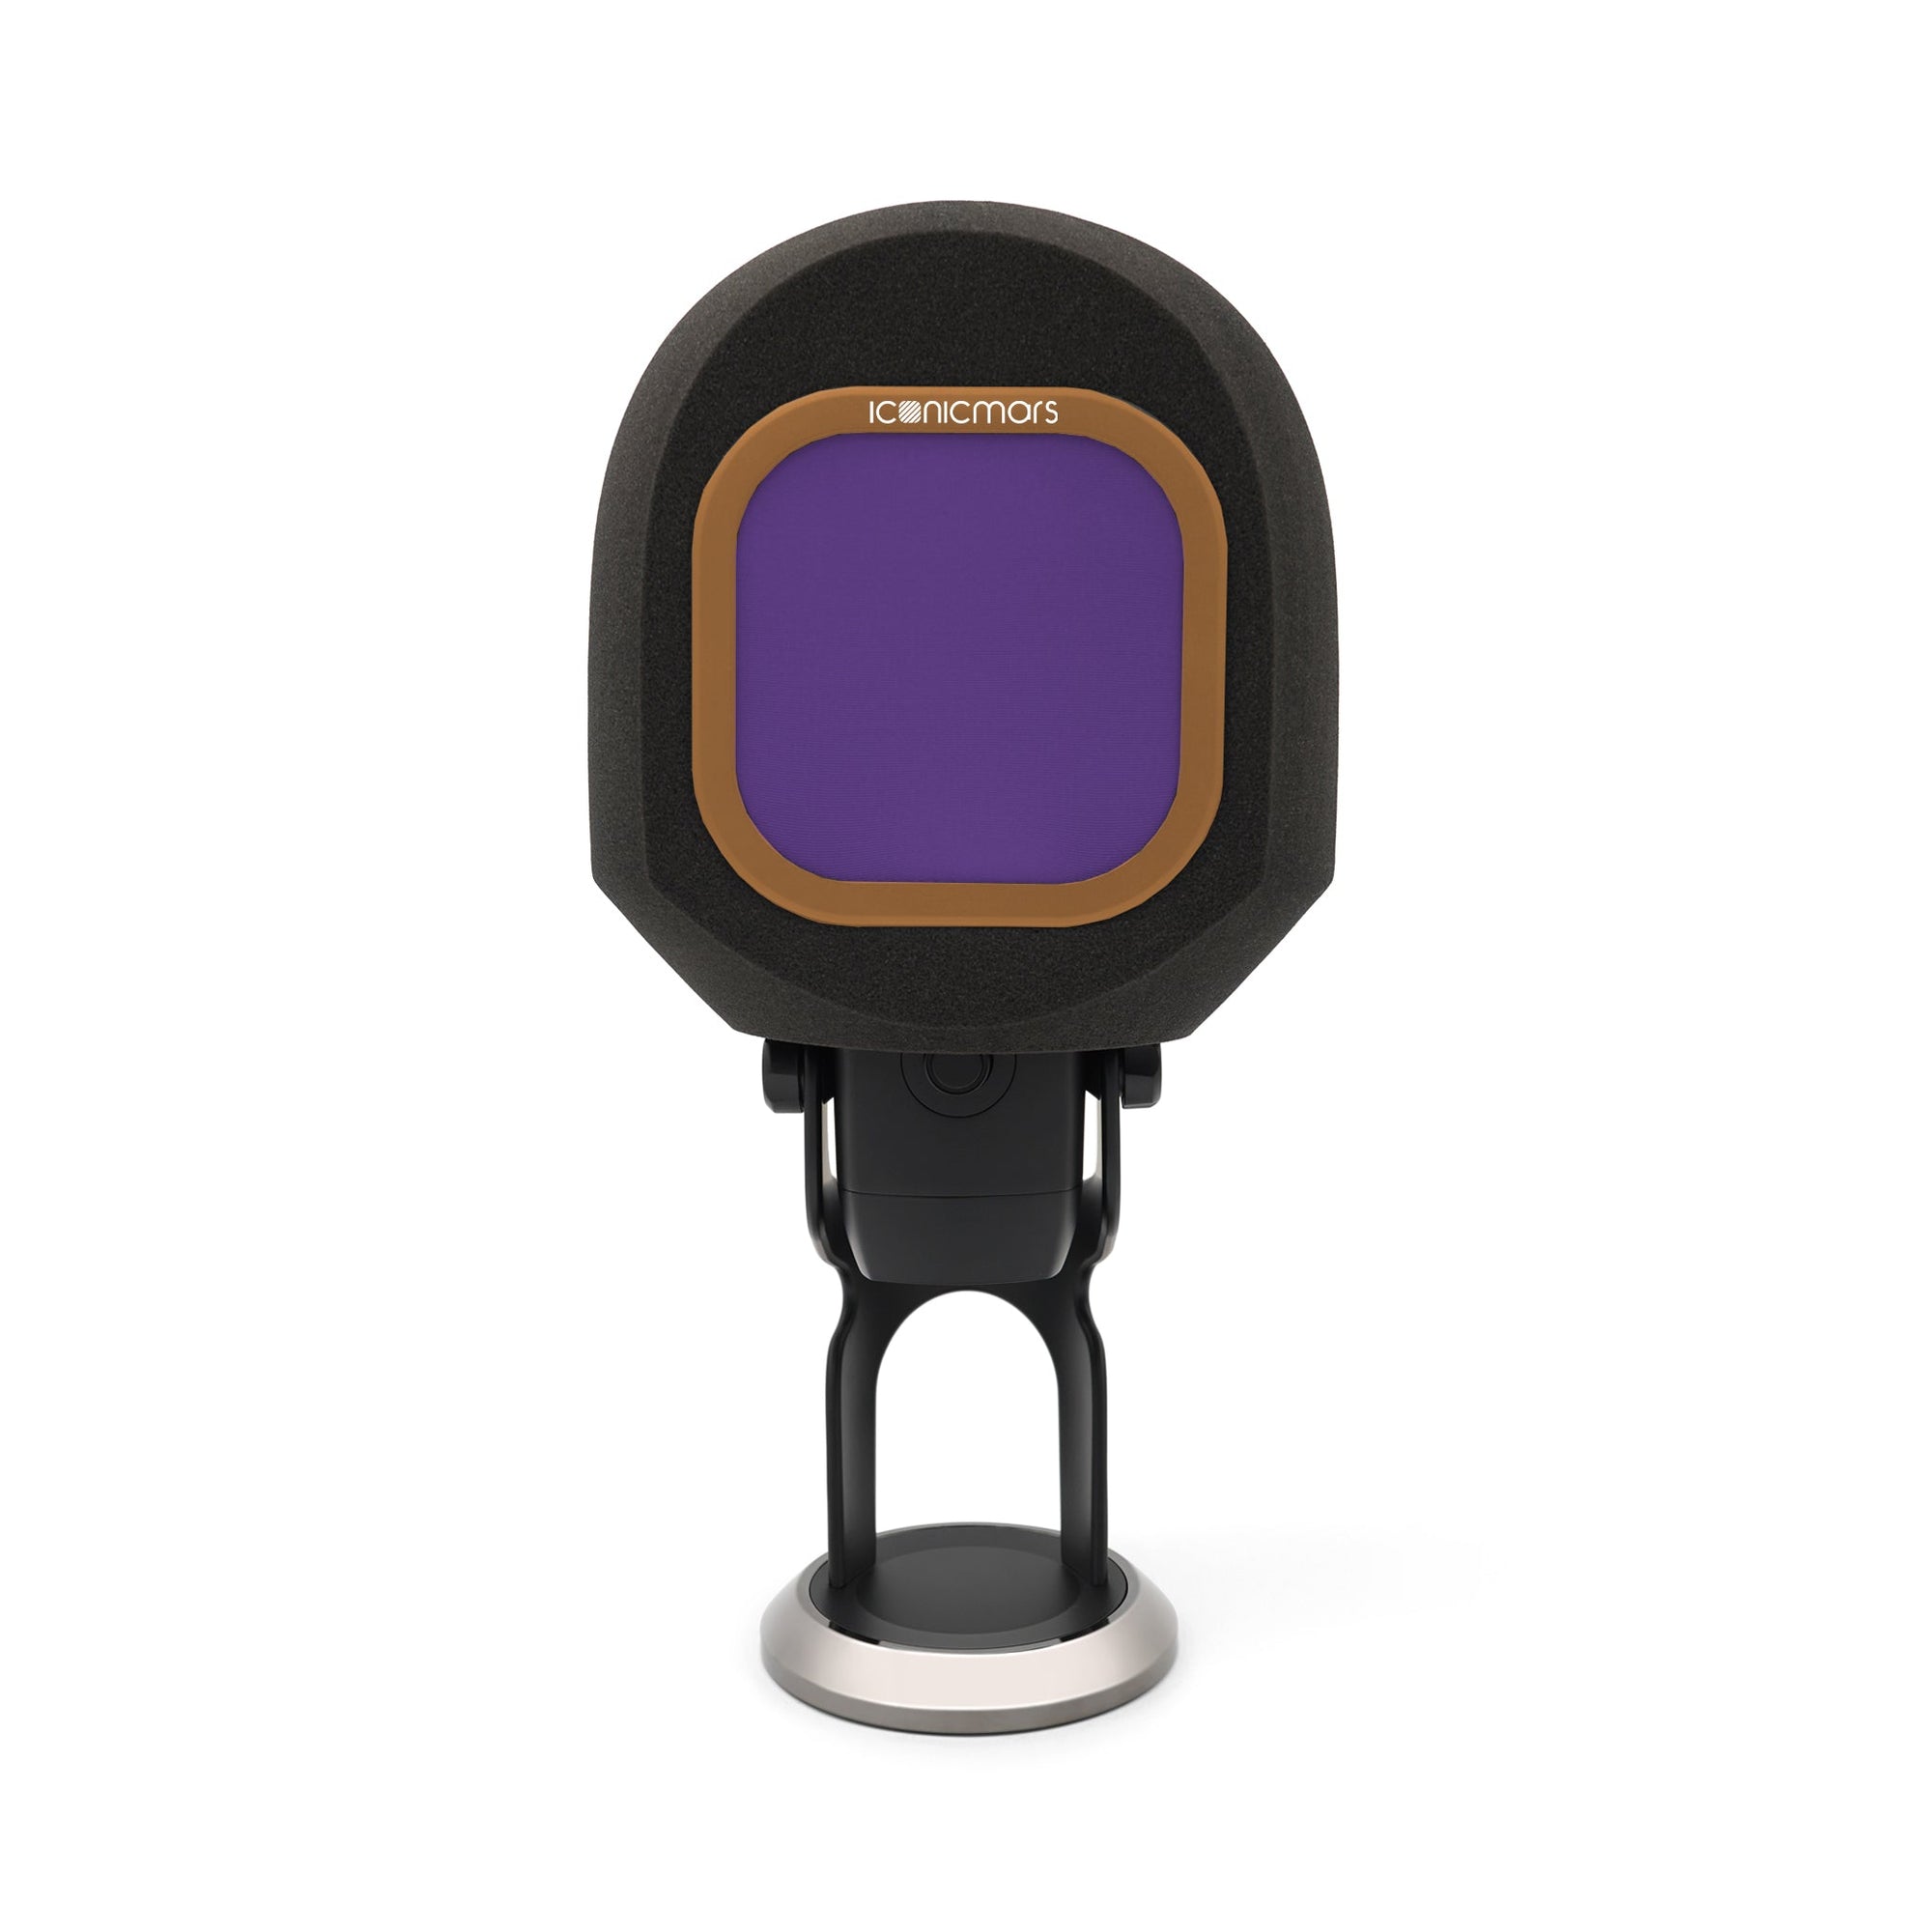 The Comet X with pop filter, isolation booth made for larger diameter microphones like Blue Yeti  -- PB&J